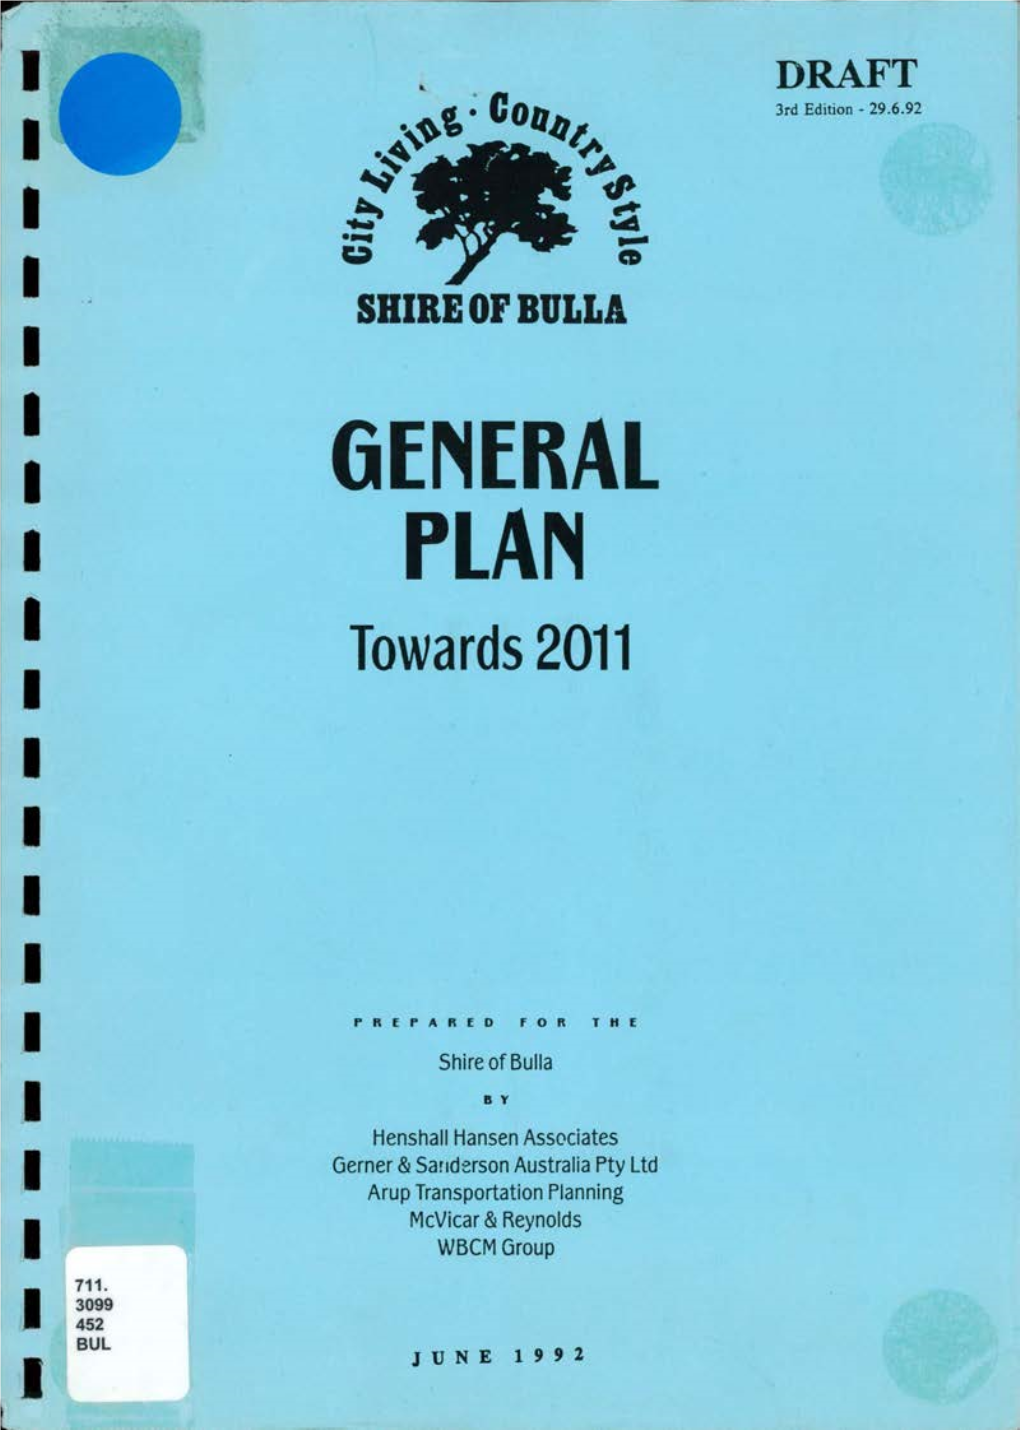 General Plan Report Is in Draft Form Only and Has Not Yet Been Adopted by Council